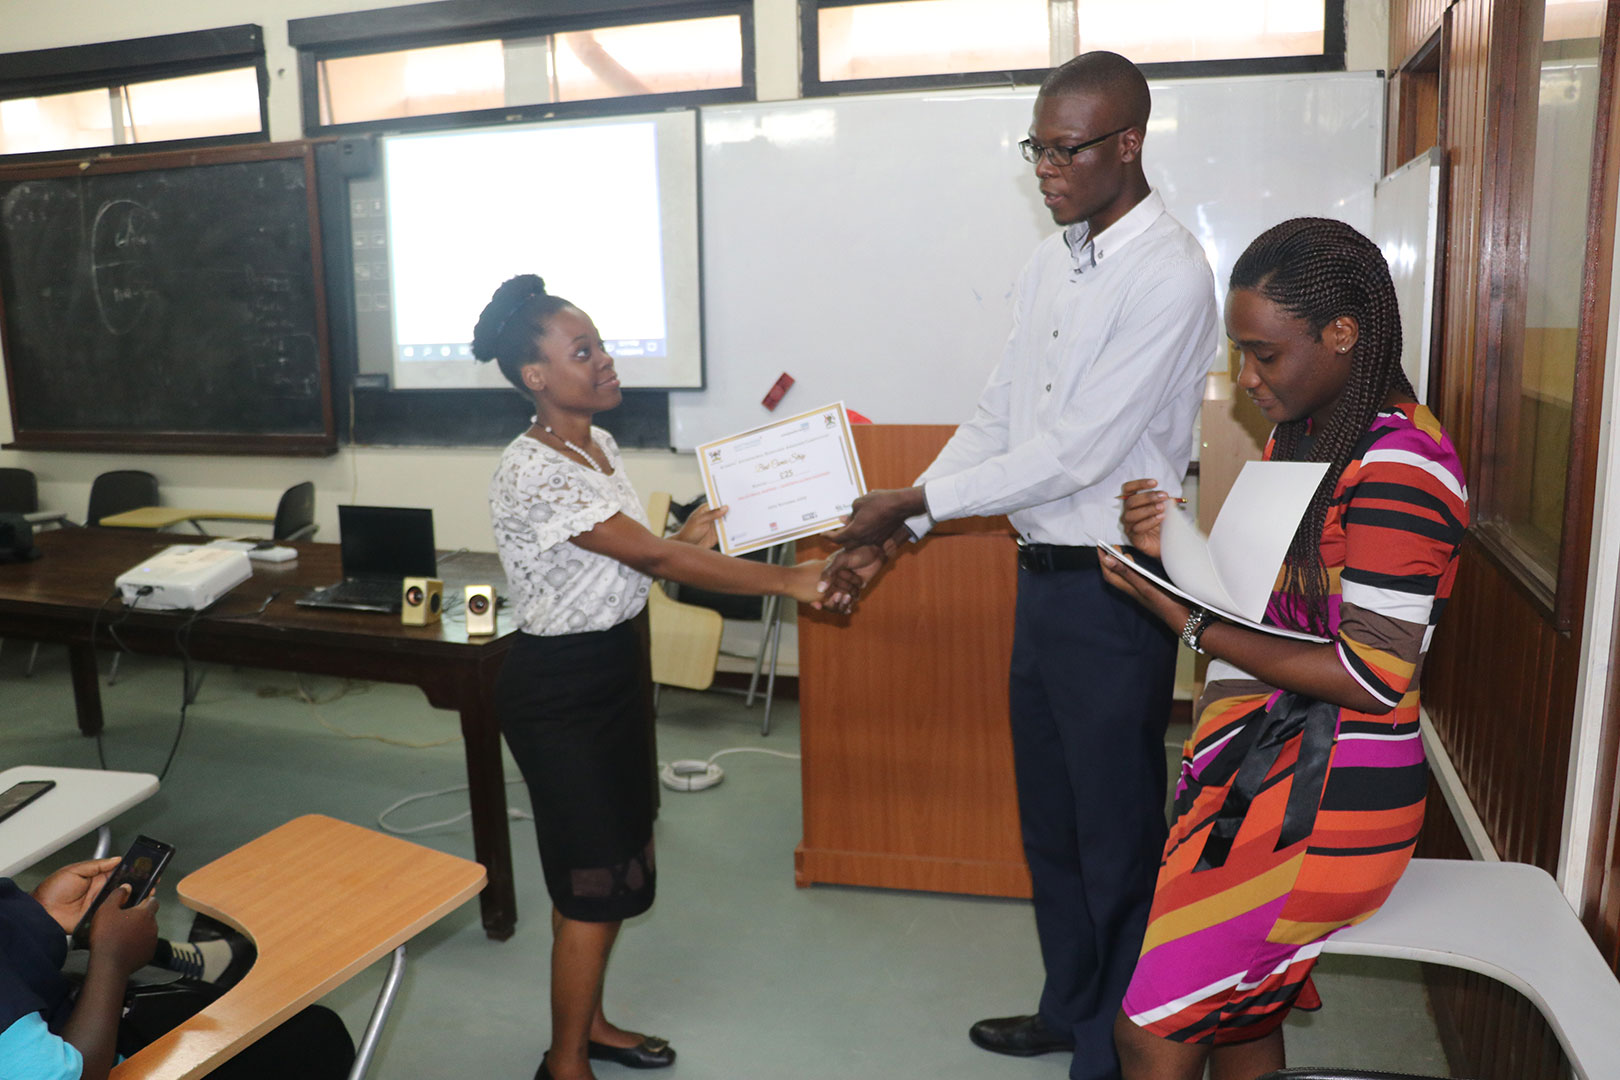 One of the students receiving a certificate for participating in the Antimicrobial Awareness Competition